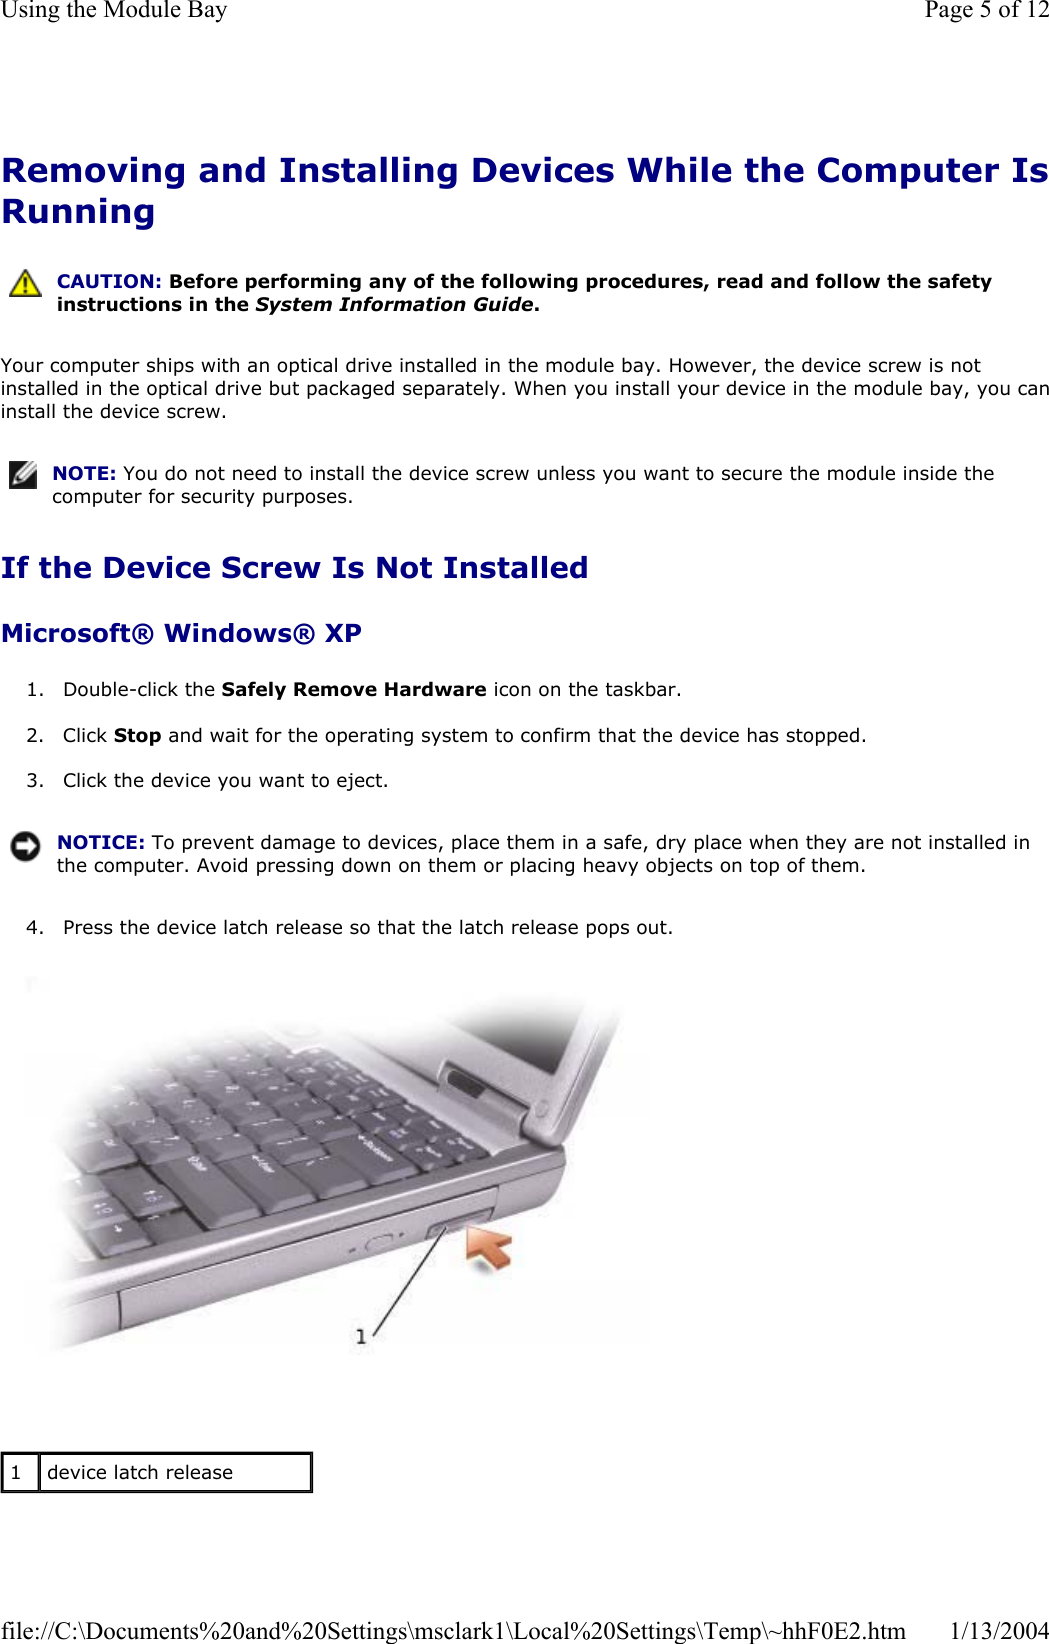 Removing and Installing Devices While the Computer IsRunningYour computer ships with an optical drive installed in the module bay. However, the device screw is not installed in the optical drive but packaged separately. When you install your device in the module bay, you caninstall the device screw. If the Device Screw Is Not Installed Microsoft® Windows® XP 1. Double-click the Safely Remove Hardware icon on the taskbar. 2. Click Stop and wait for the operating system to confirm that the device has stopped. 3. Click the device you want to eject. 4. Press the device latch release so that the latch release pops out. CAUTION: Before performing any of the following procedures, read and follow the safety instructions in the System Information Guide.NOTE: You do not need to install the device screw unless you want to secure the module inside the computer for security purposes.NOTICE: To prevent damage to devices, place them in a safe, dry place when they are not installed in the computer. Avoid pressing down on them or placing heavy objects on top of them.1device latch release Page 5 of 12Using the Module Bay1/13/2004file://C:\Documents%20and%20Settings\msclark1\Local%20Settings\Temp\~hhF0E2.htm